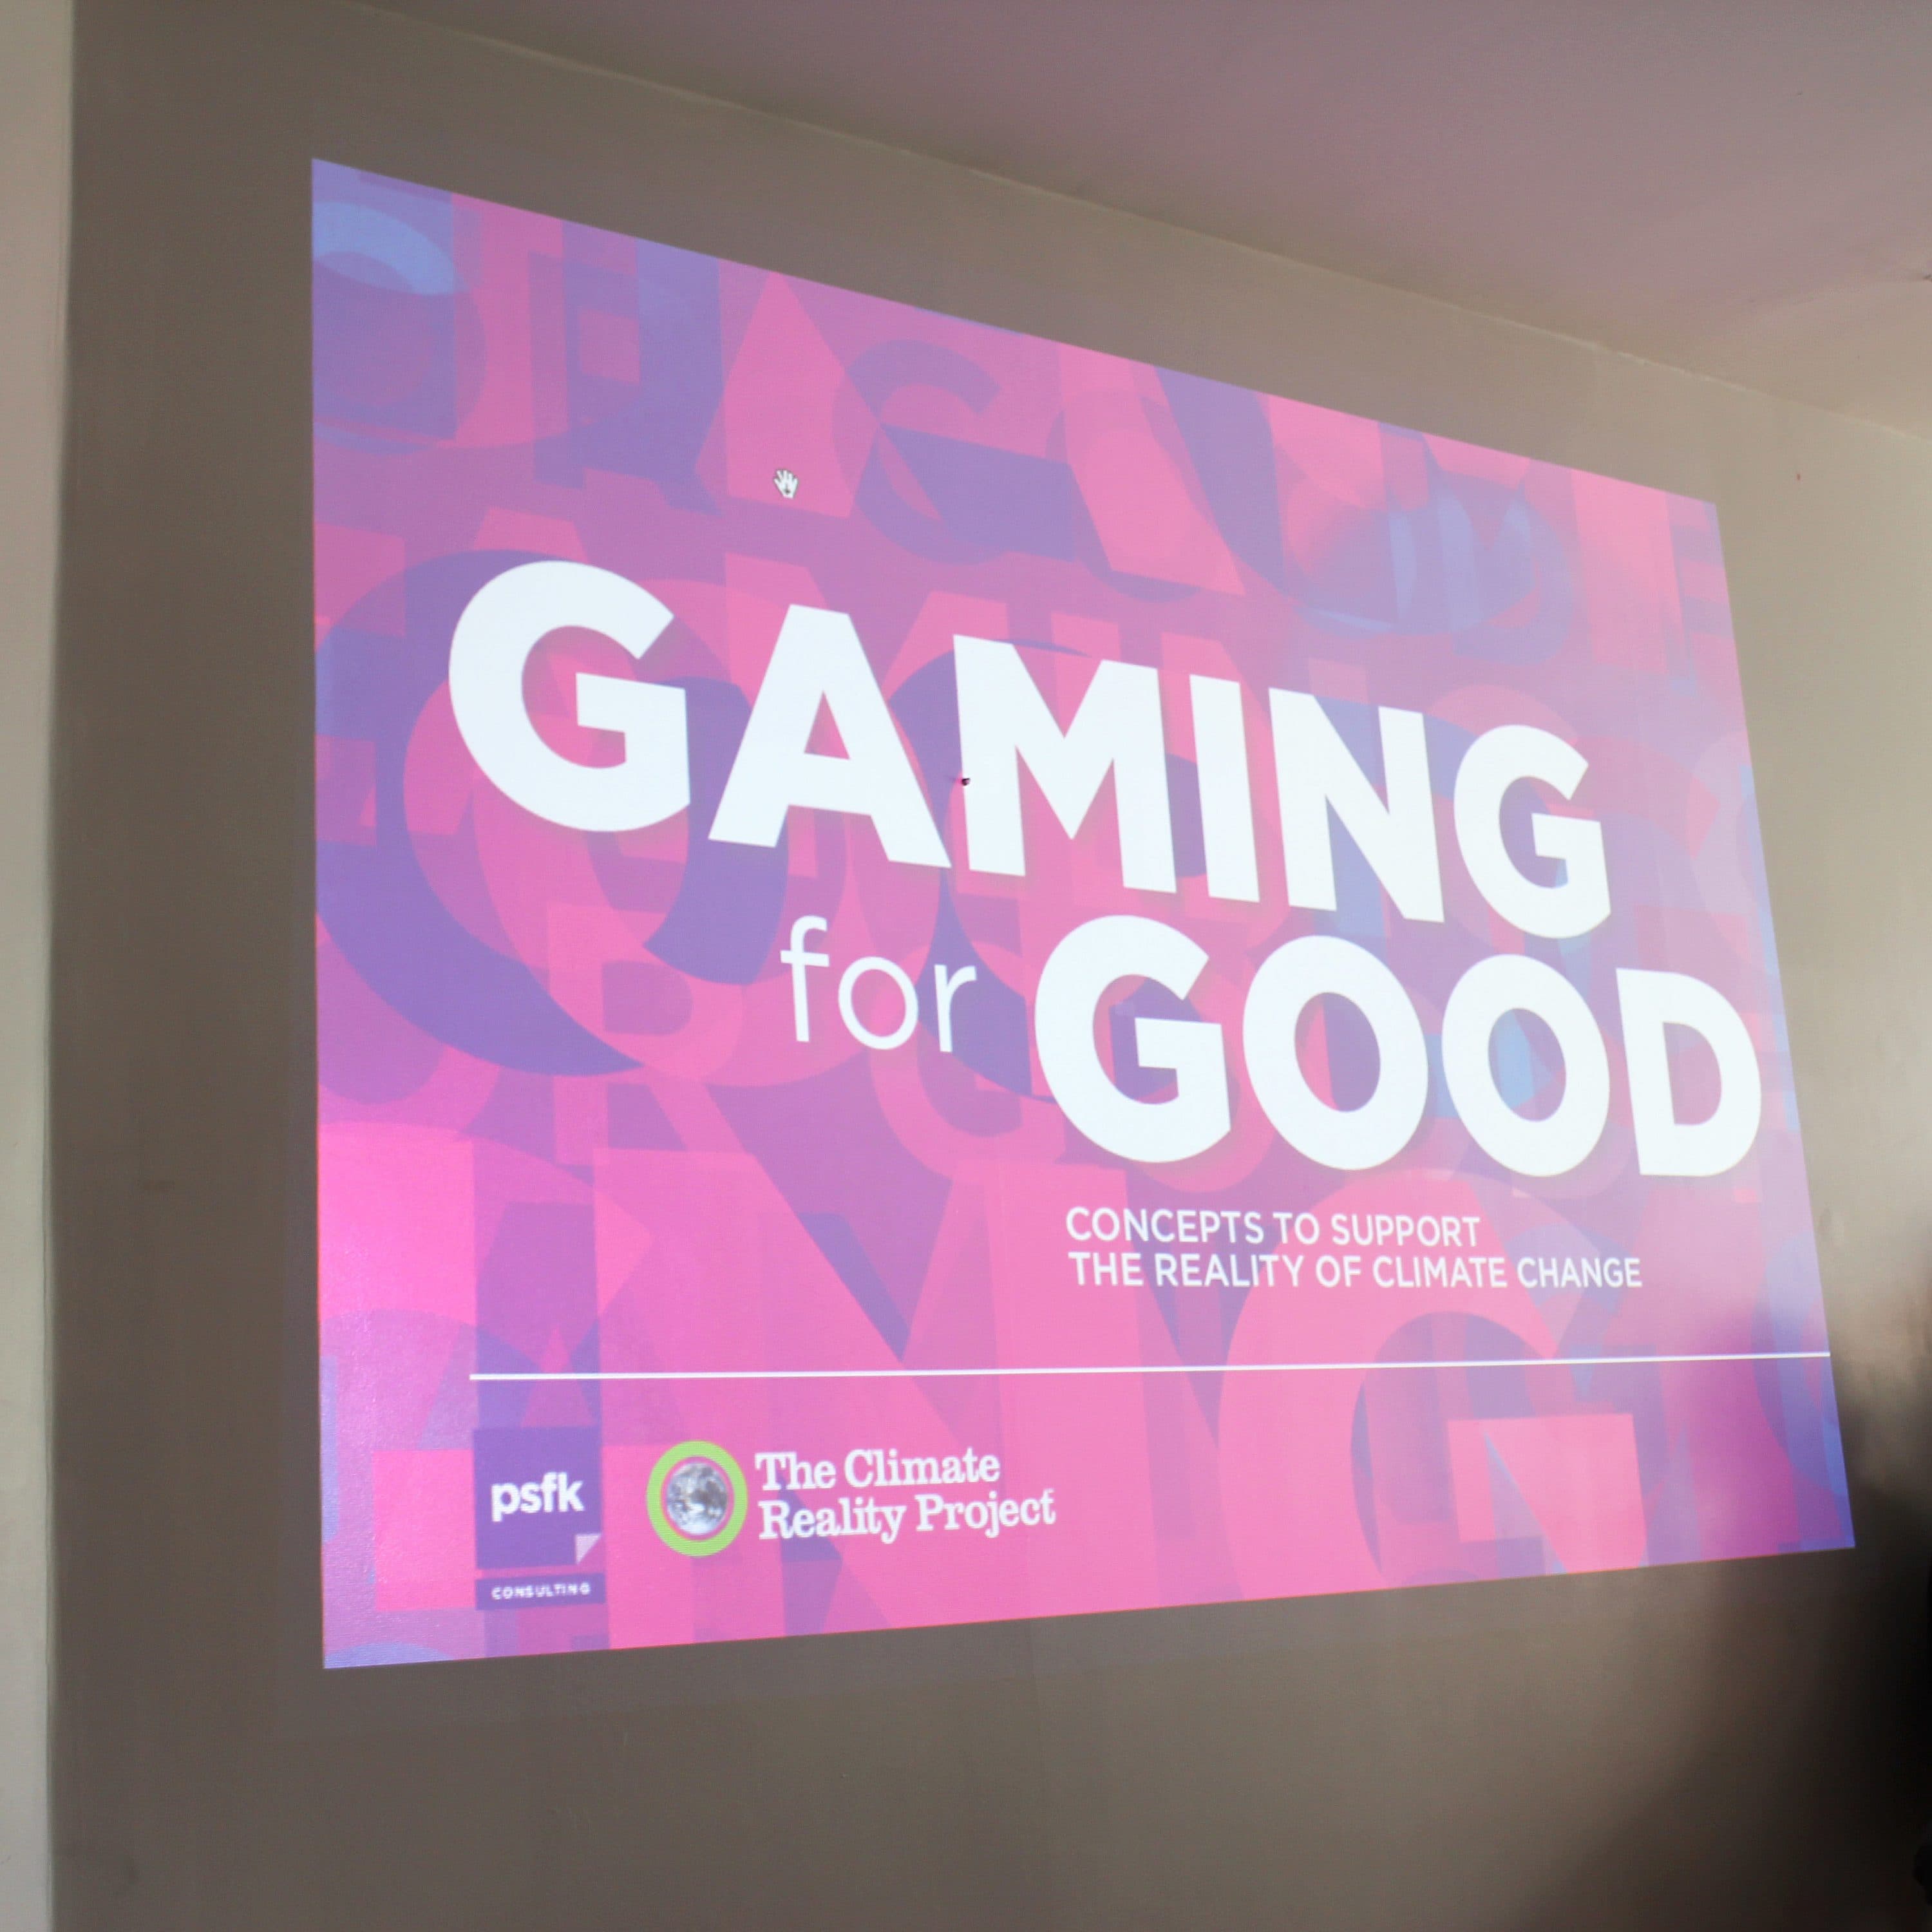 A man sits in a room next to a large presentation screen displaying the title "Gaming for Good" with the subtitle "Concepts to support the reality of climate change." The Climate Reality Project and PSFK logos are shown on the bottom left of the screen.